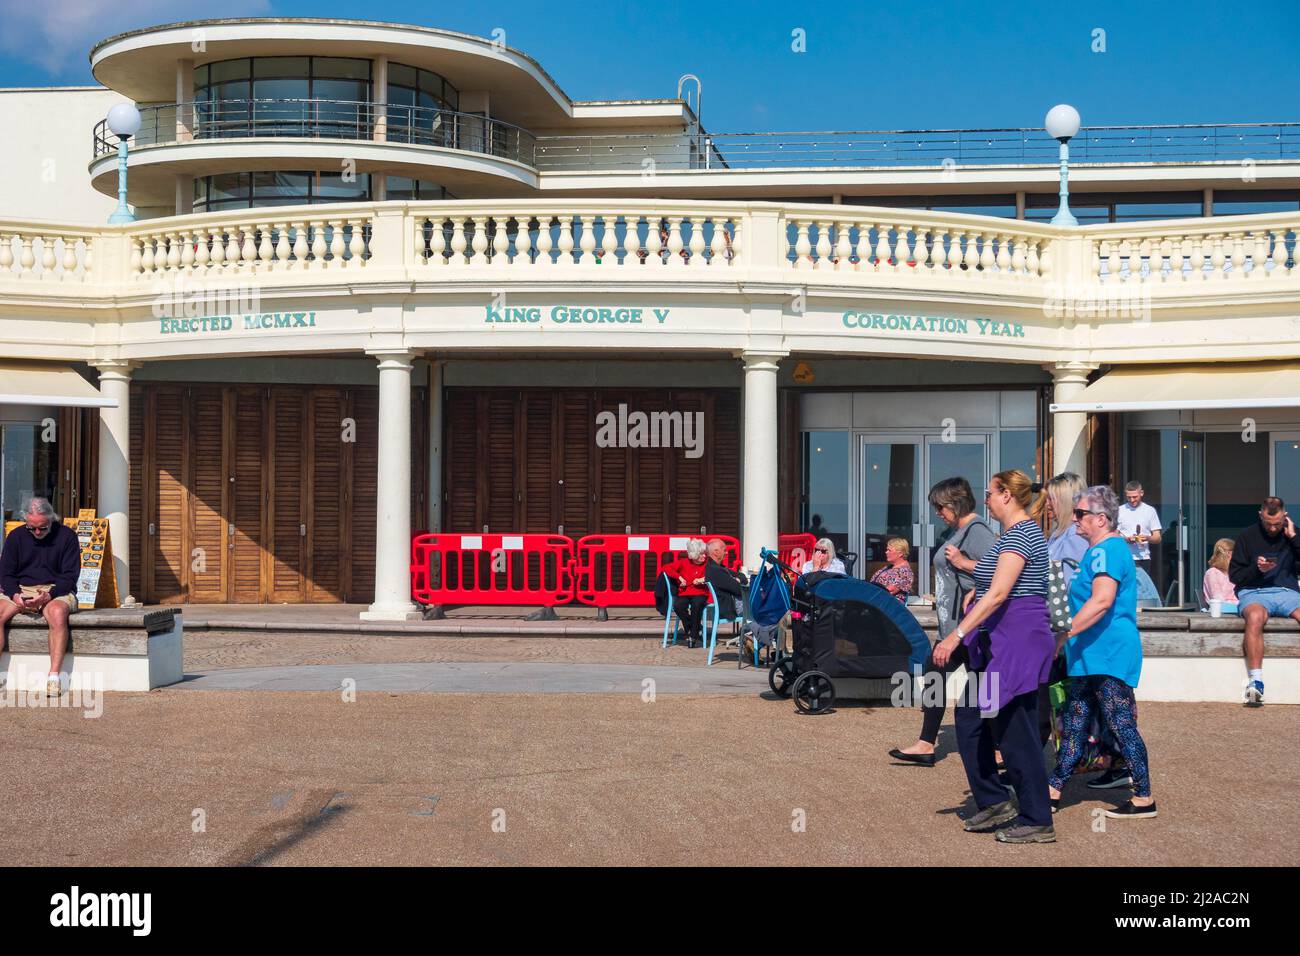 Warm Early Spring day on Bexhill seafront, visitors look at the stores under the De La Warr Pavilion, East Sussex, UK Stock Photo